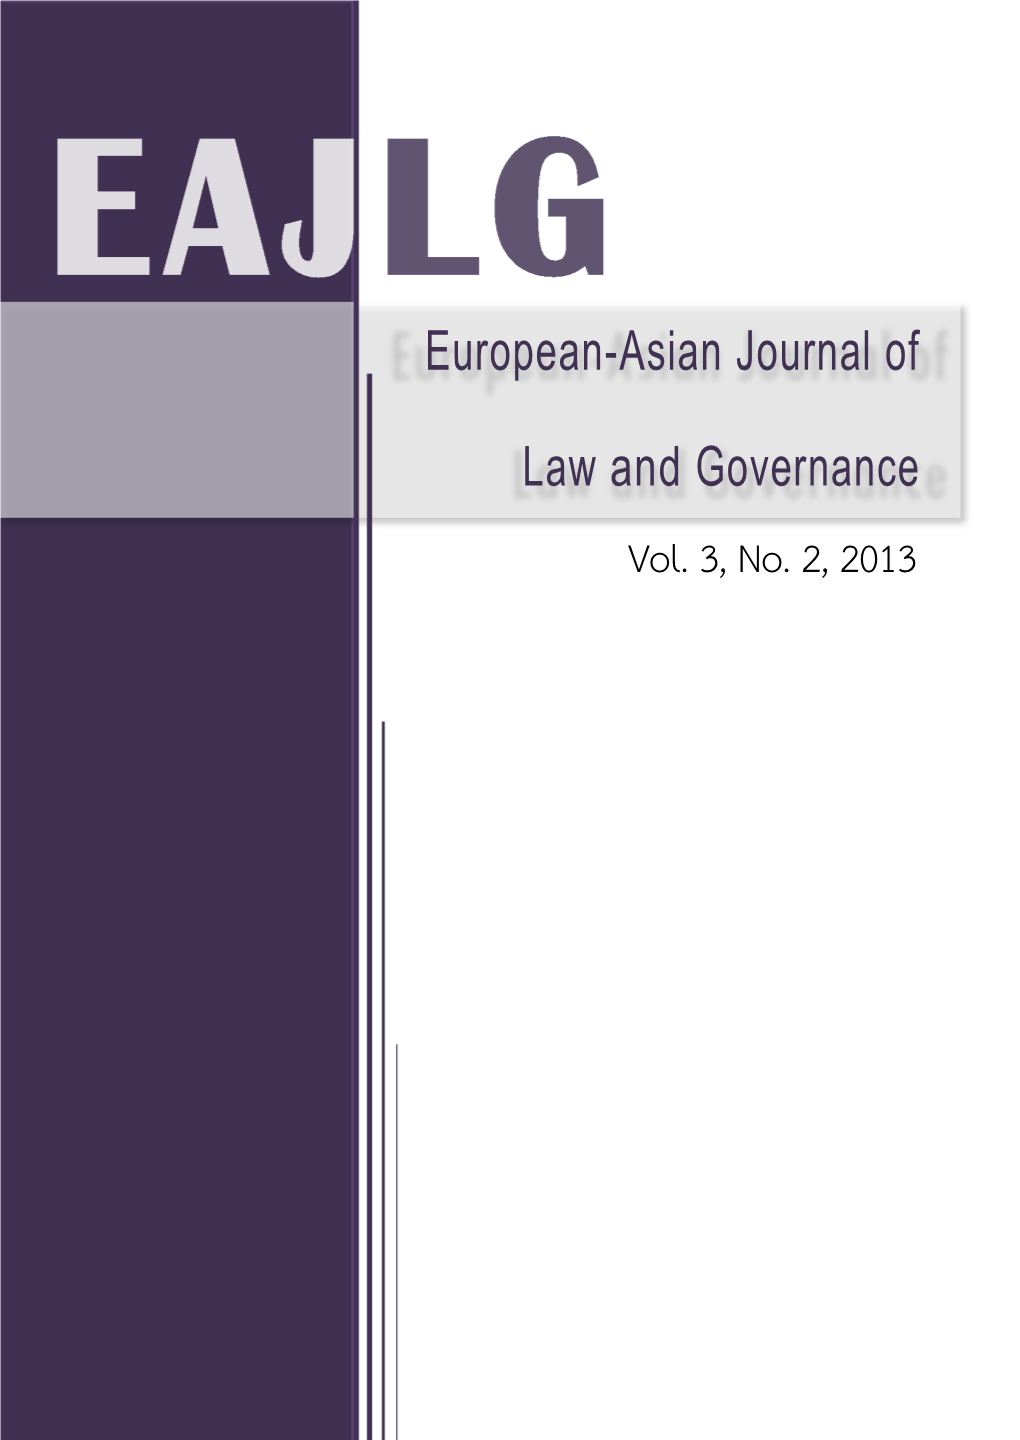 European-Asian Journal of Law and Governance Vol. 3, No. 2, 2013